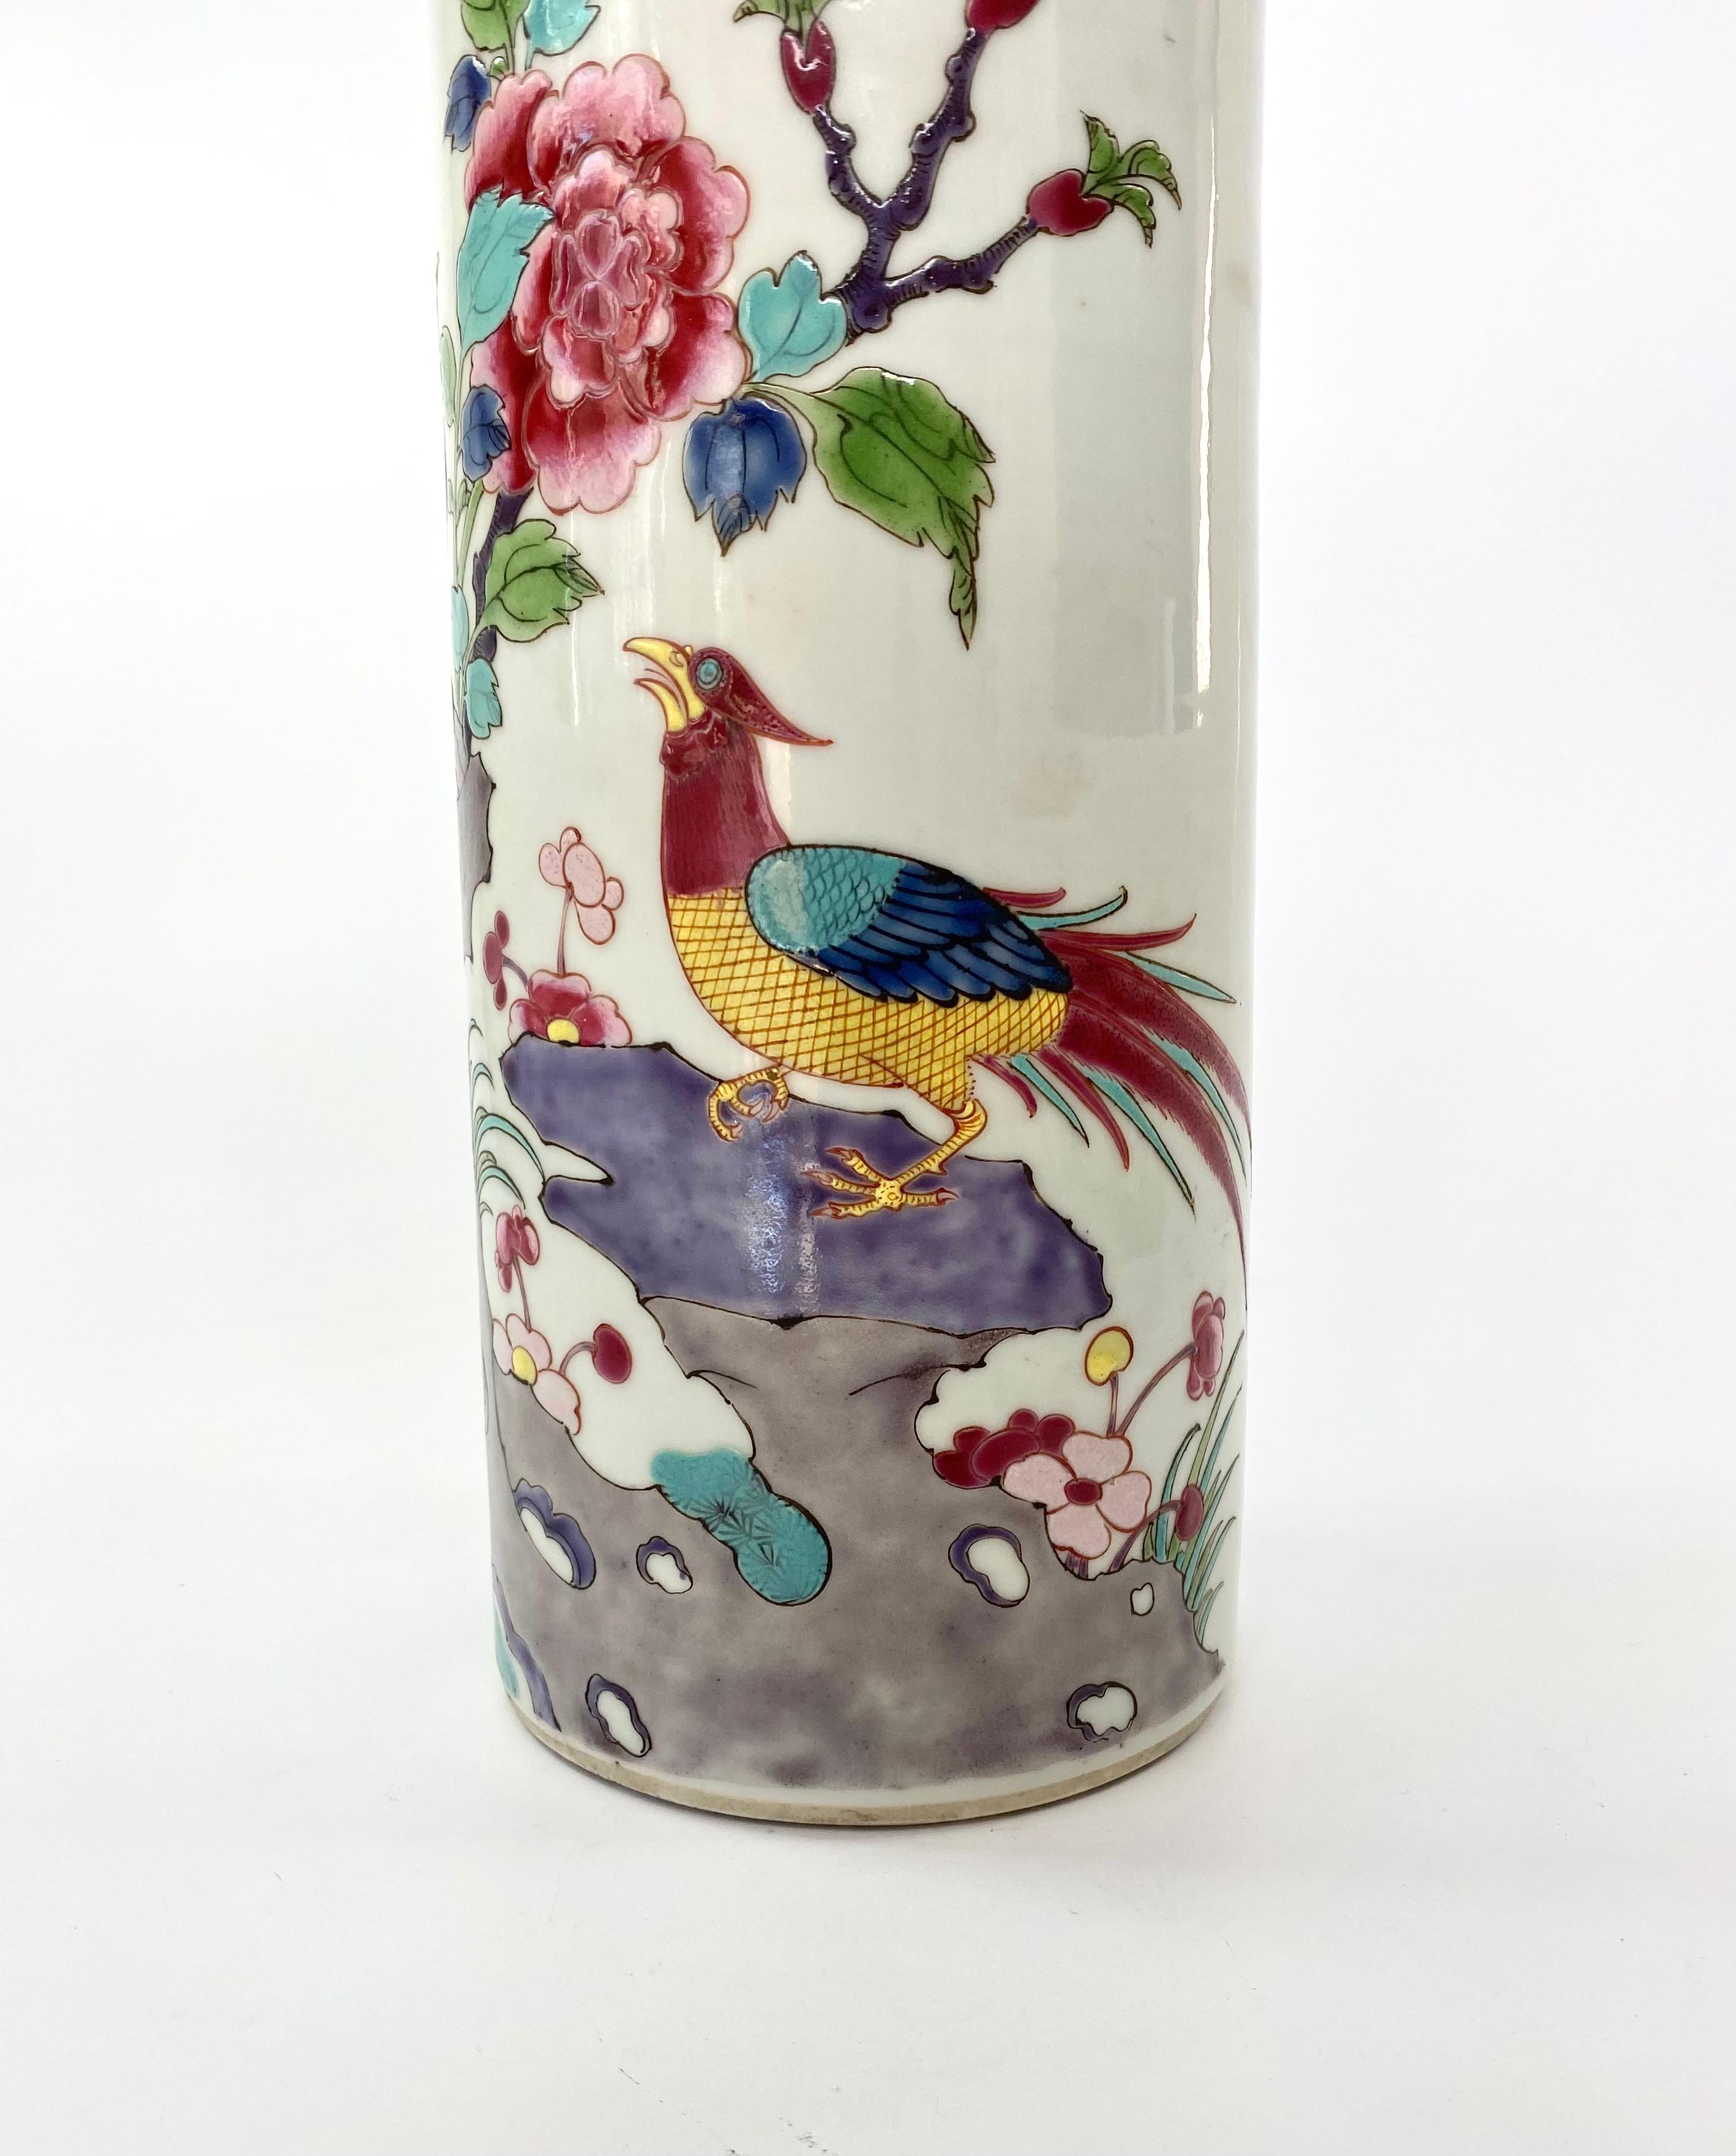 Chinese porcelain spill vase, c. 1890, Guangxu Period. The large, flared spill vase, vibrantly painted in Fencai or famille rose enamels, with a scene of exotic birds, perched upon rocks, beneath a flowering peony tree.
Medium: Porcelain
Measures: